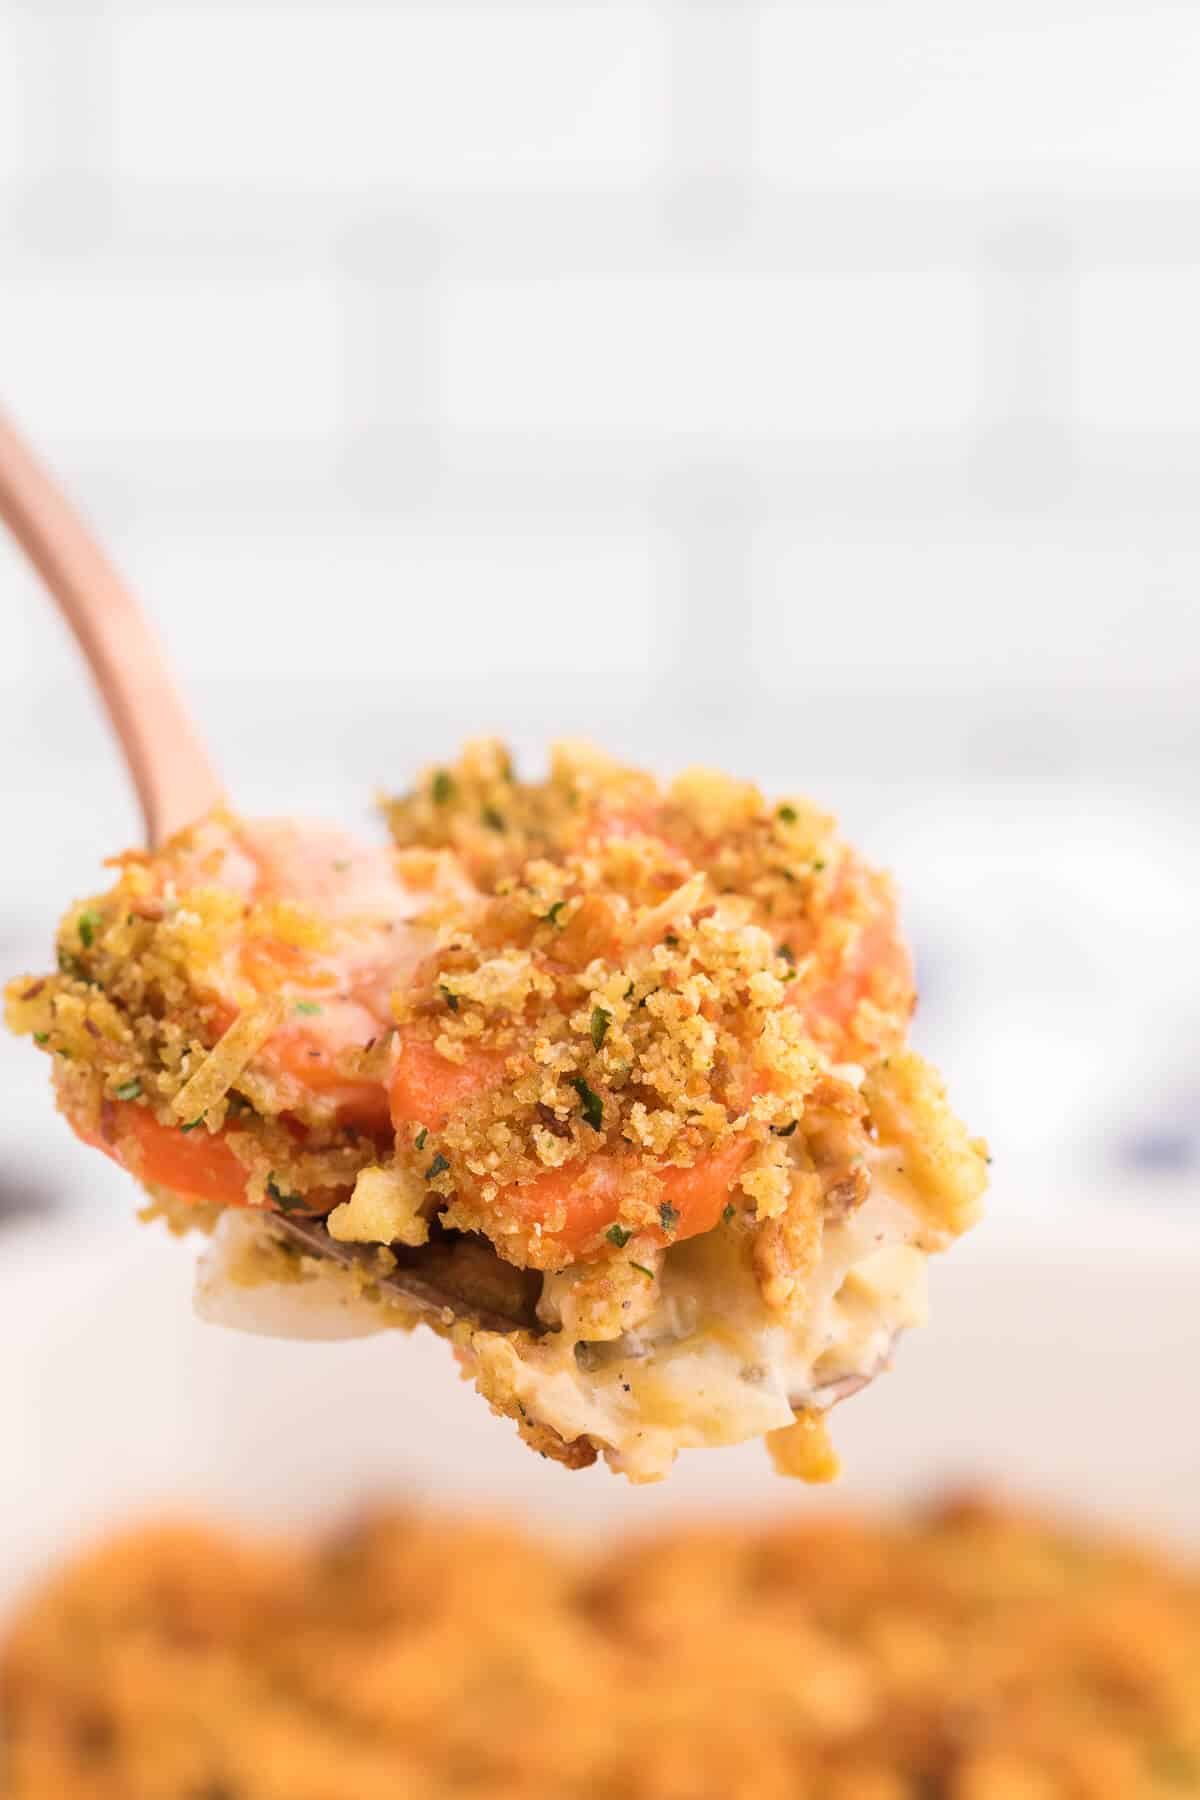 Carrot Casserole - This comforting vegetable side dish recipe is creamy, cheesy with a buttery stuffing topping. Baked to perfection, it's also kid-friendly and a delicious way to get your kids to eat more veggies.